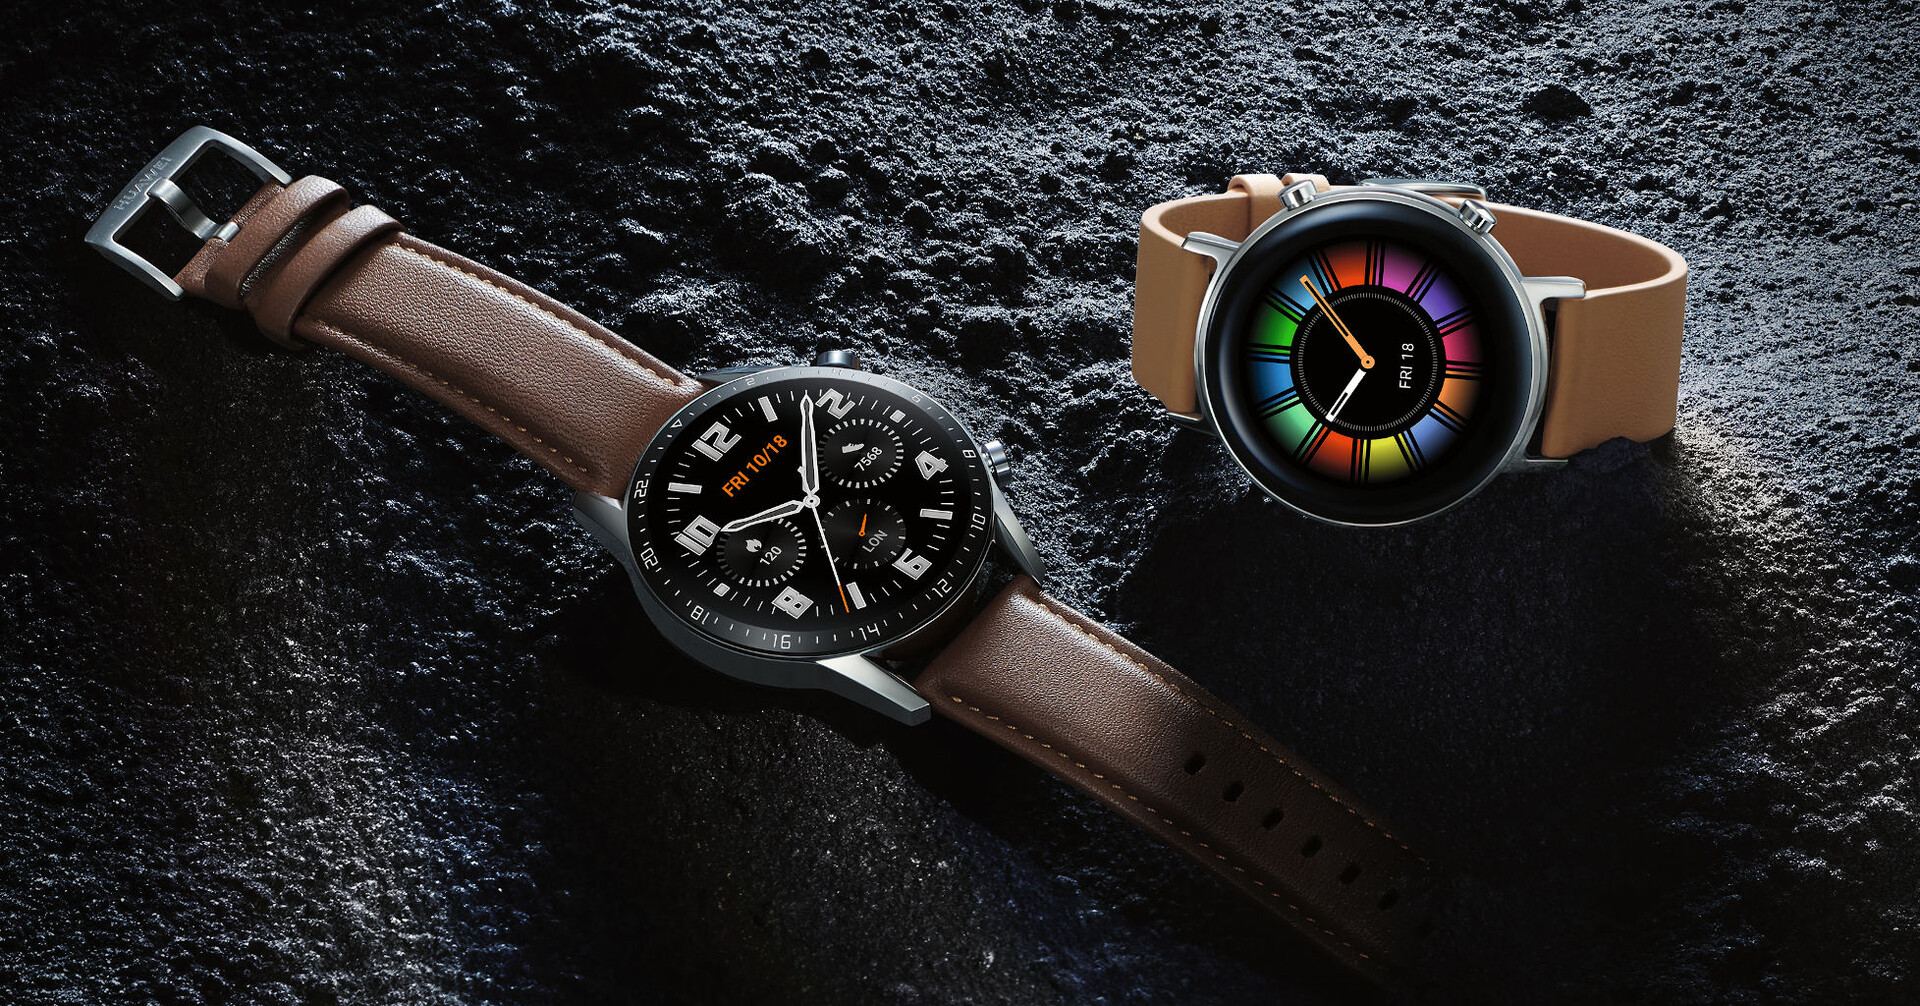 Huawei Watch GT 2 and Watch GT 2e smartwatches receive an update to allow downloading third-party apps